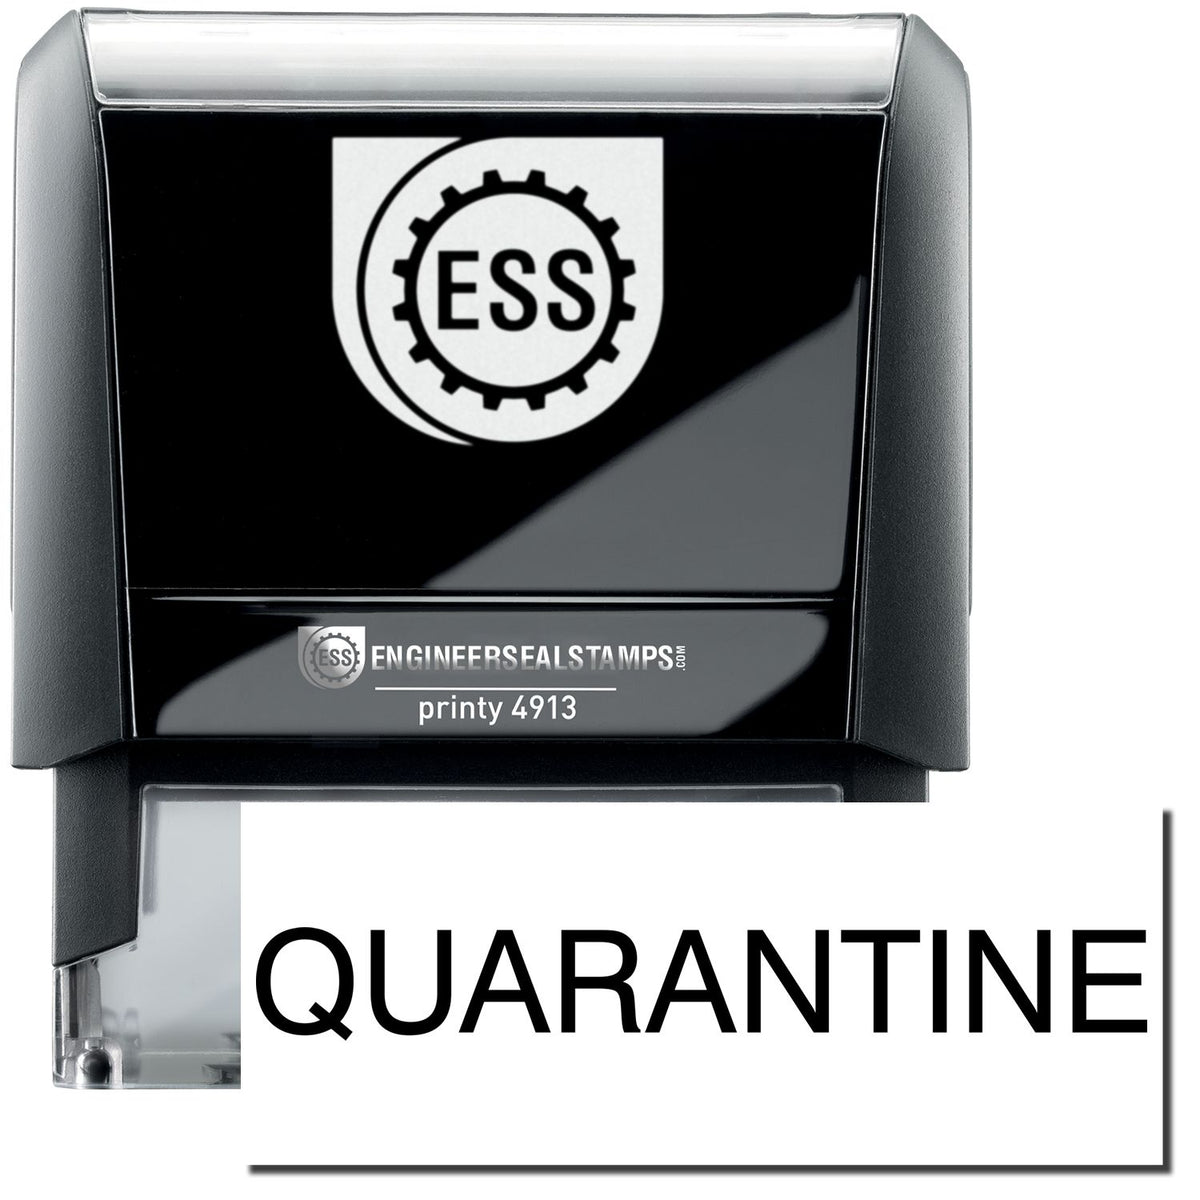 A self-inking stamp with a stamped image showing how the text &quot;QUARANTINE&quot; in a large font is displayed by it after stamping.